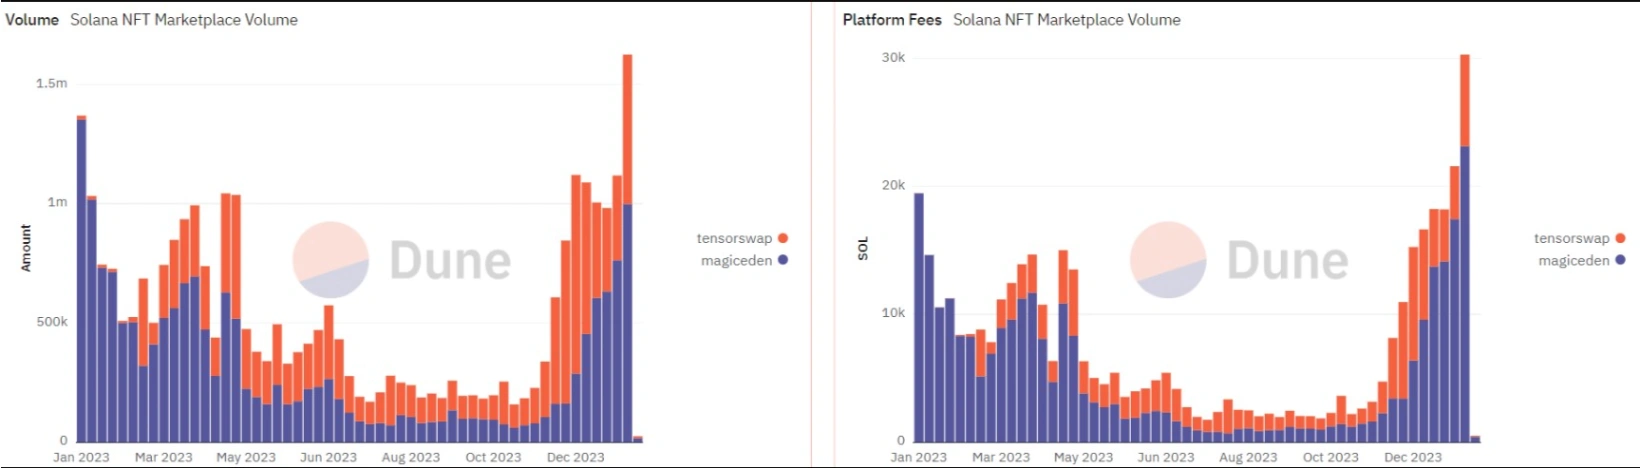 surge in solana nft sales volume over the past week 65b976c436375